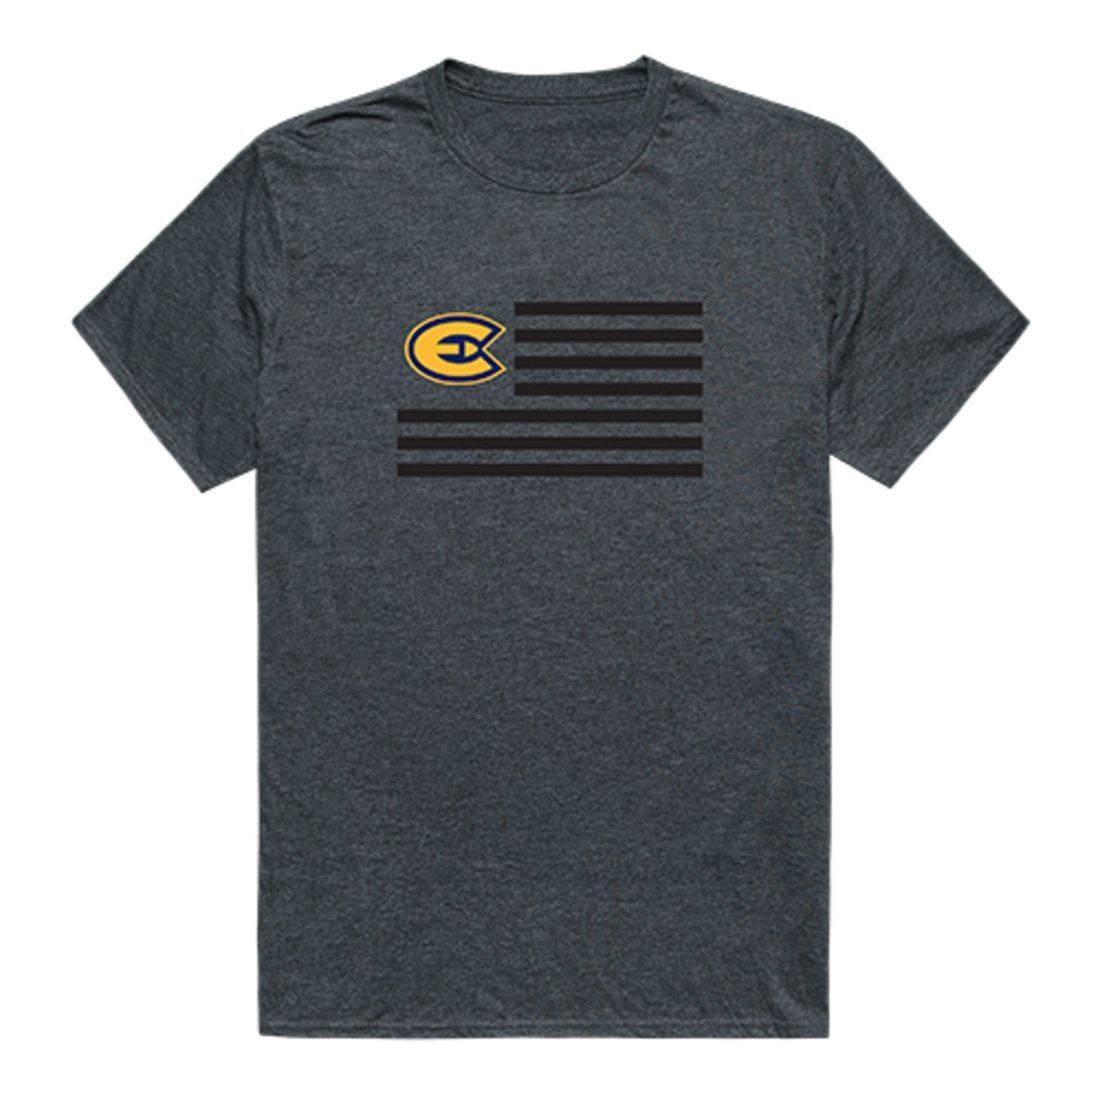 UWEC University of Wisconsin-Eau Claire Blugolds USA Flag Tee T-Shirt Heather Charcoal-Campus-Wardrobe